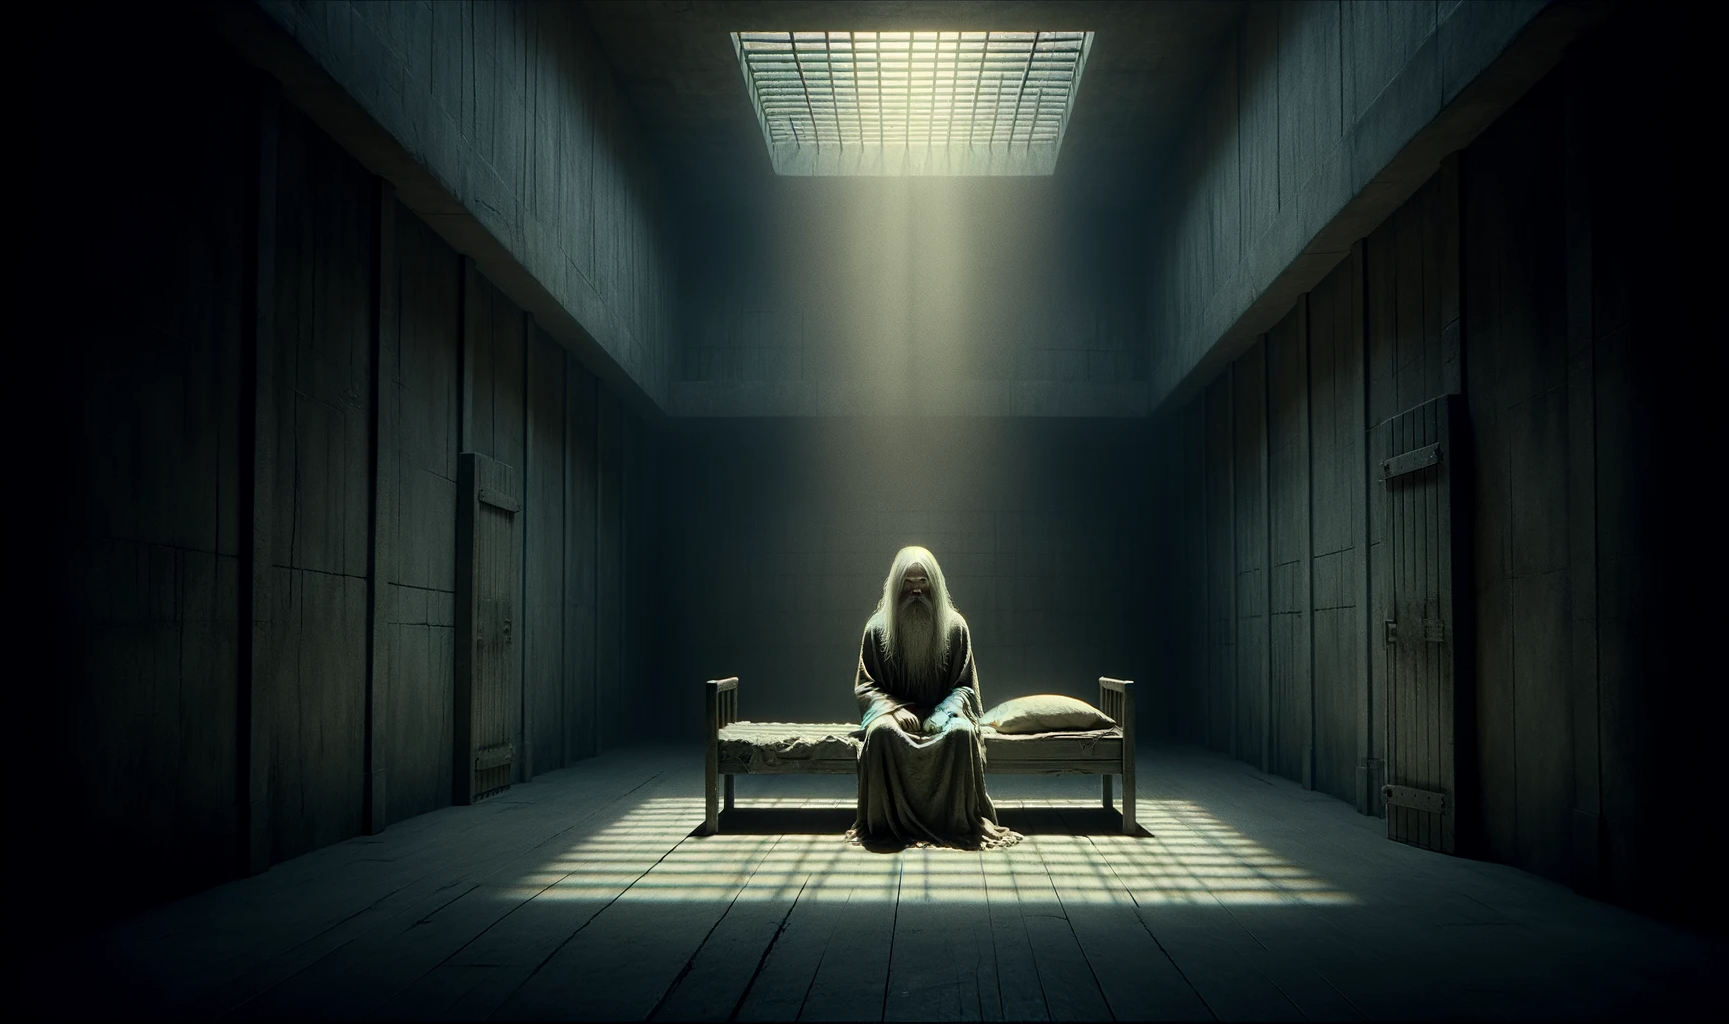 DALL·E 2023-11-25 12.45.34 - A wide, melancholic scene from Chapter 11, set in a dim, sparsely furnished prison cell. The central figure, Okhulan, is depicted with long, white hai